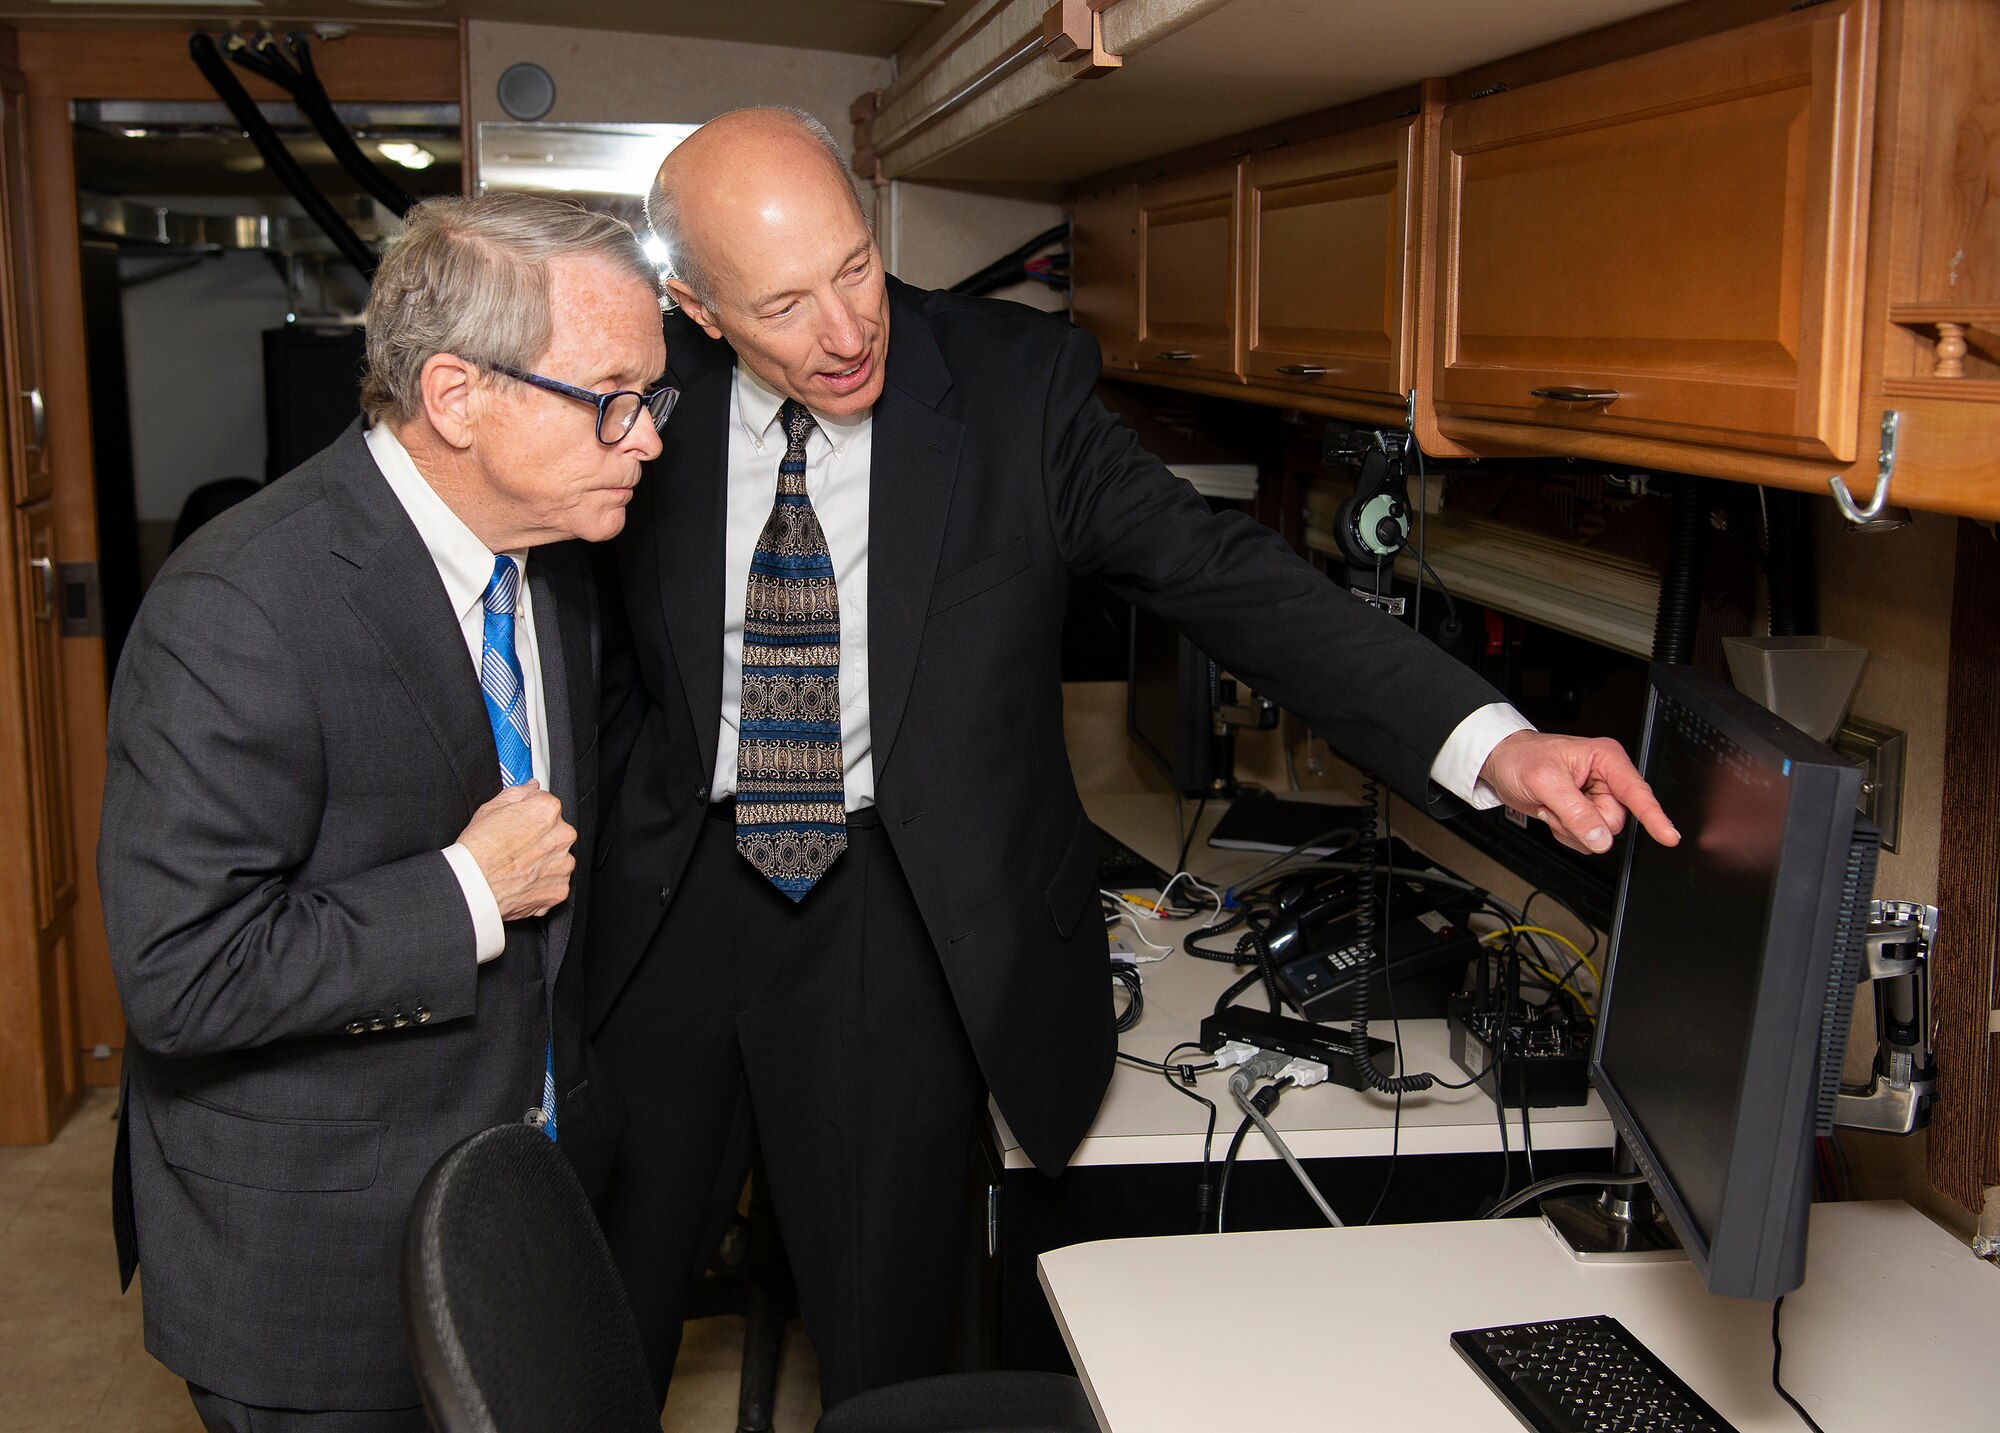 Art Huber, deputy director for operations at the Air Force Research Laboratory, shows Ohio Governor Mike DeWine one of the terminals of the SkyVision system aboard its transportable platform April 19, 2019 in a facility on the Springfield-Beckley Municipal Airport. DeWine was taking part in an announcement about the Federal Aviation Administration granting a Certificate of Waiver or Authorization to AFRL for beyond visual line of sight flights of unmanned aerial systems. (U.S. Air Force photo by R.J. Oriez)